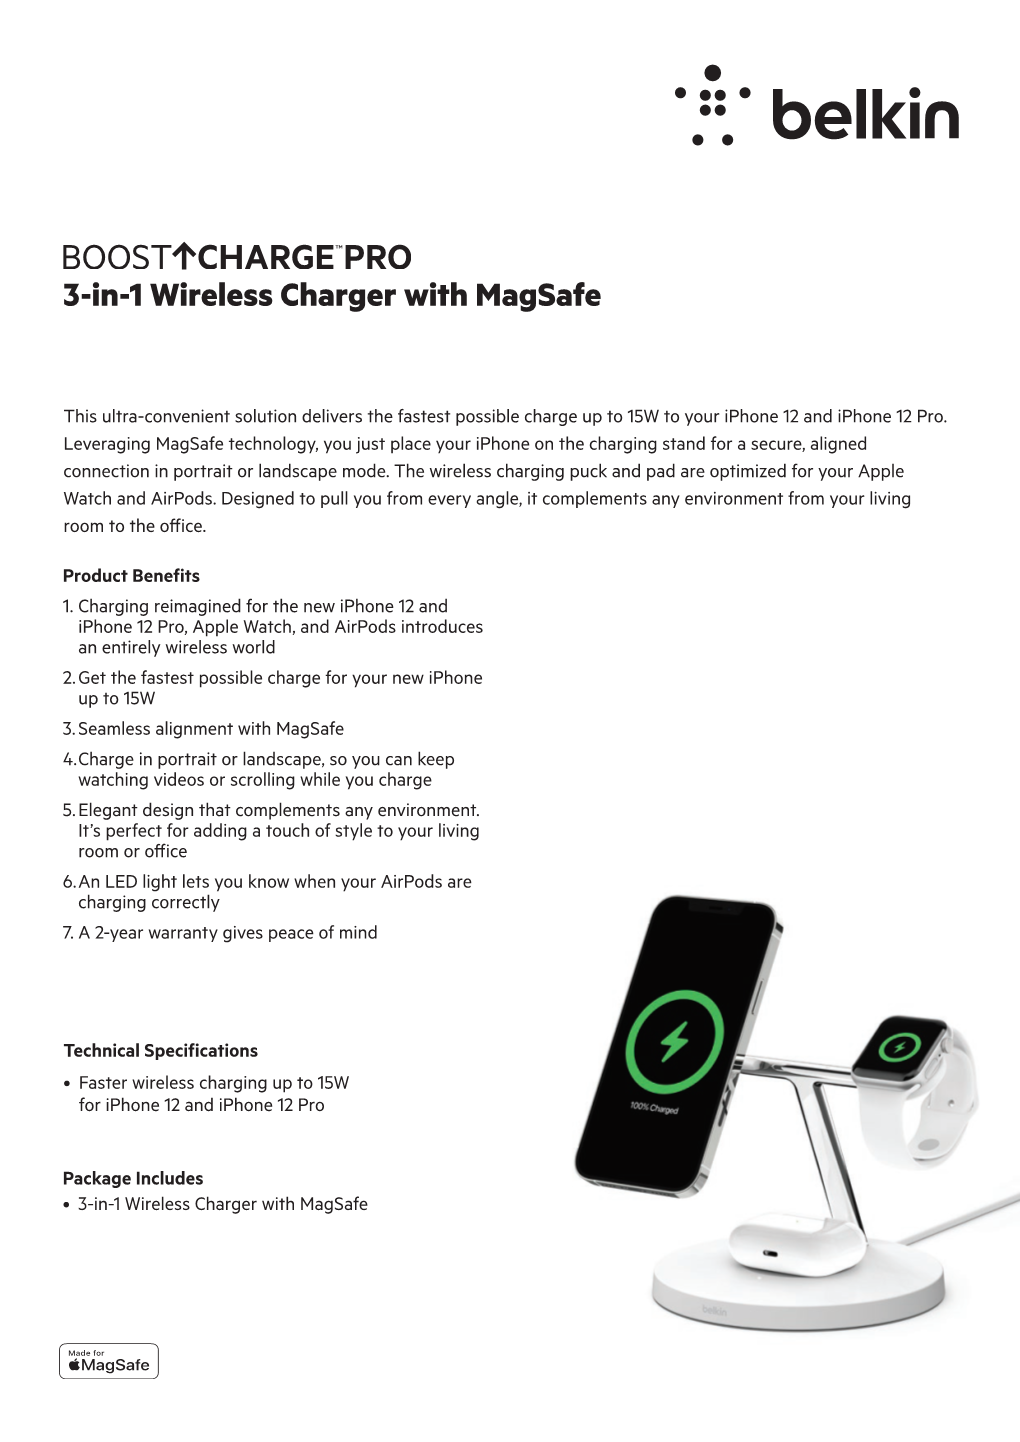 3-In-1 Wireless Charger with Magsafe